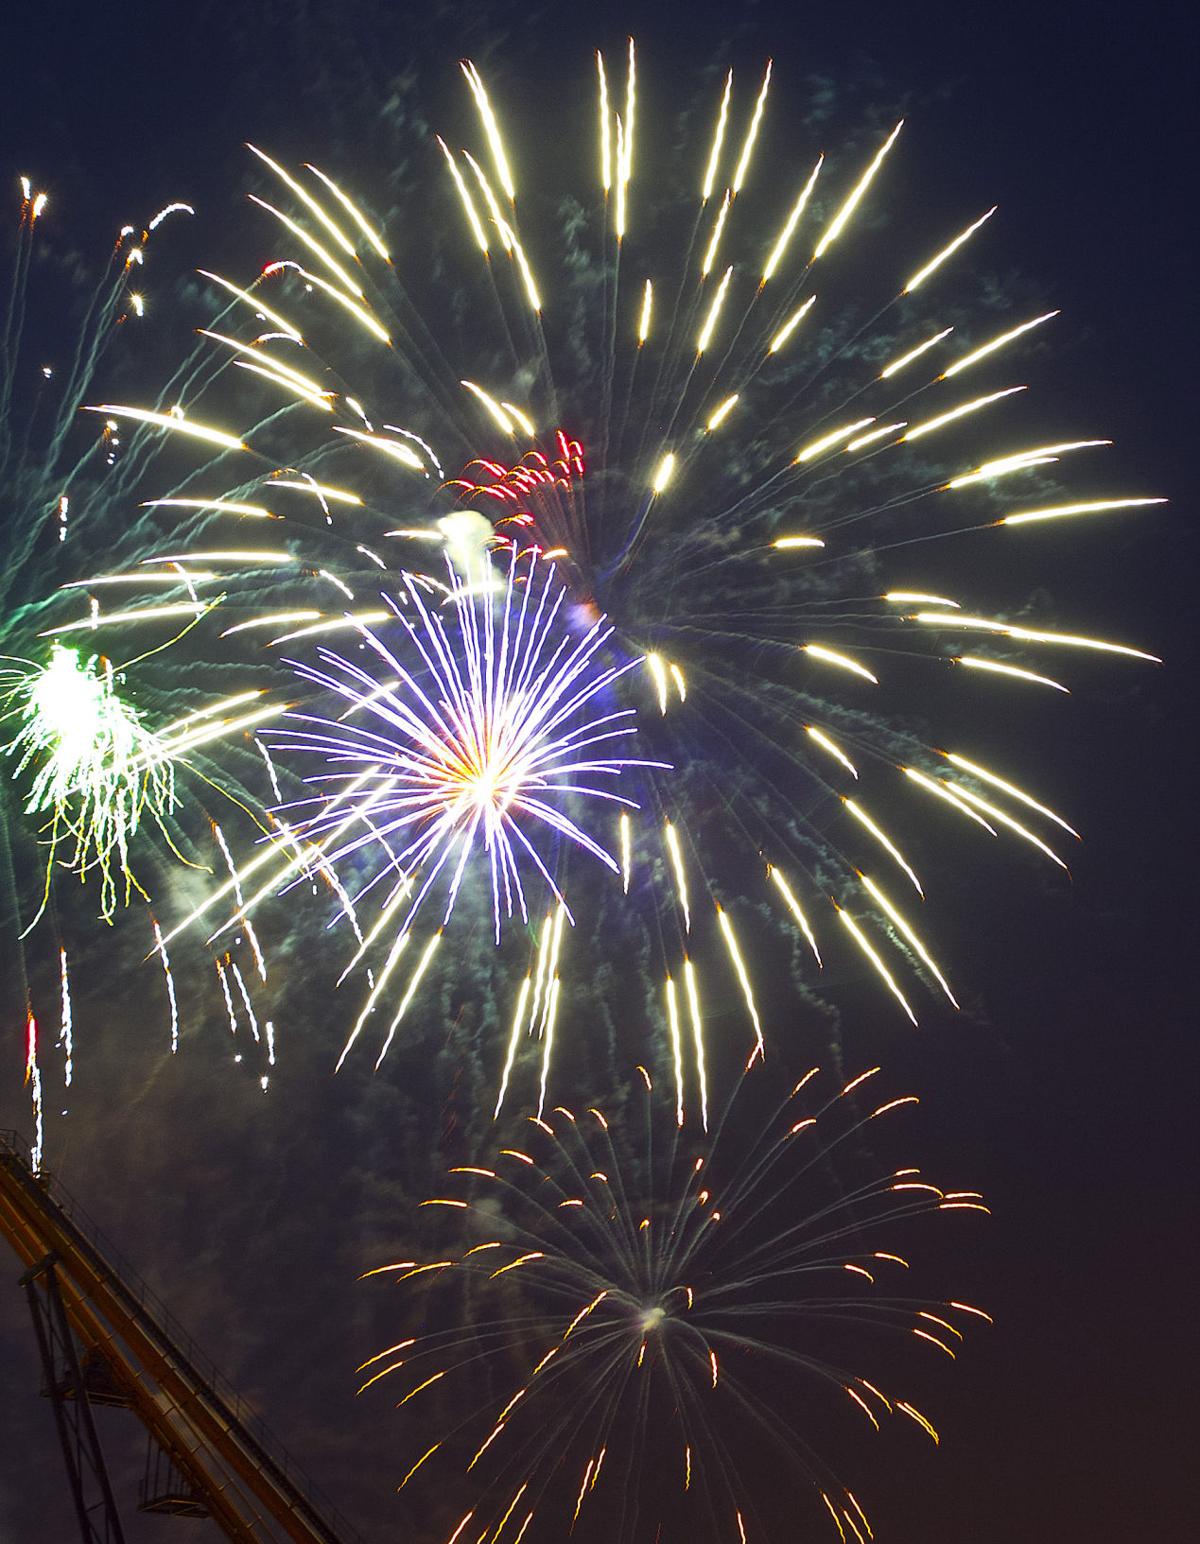 Where to see fireworks and celebrate the Fourth of July in South